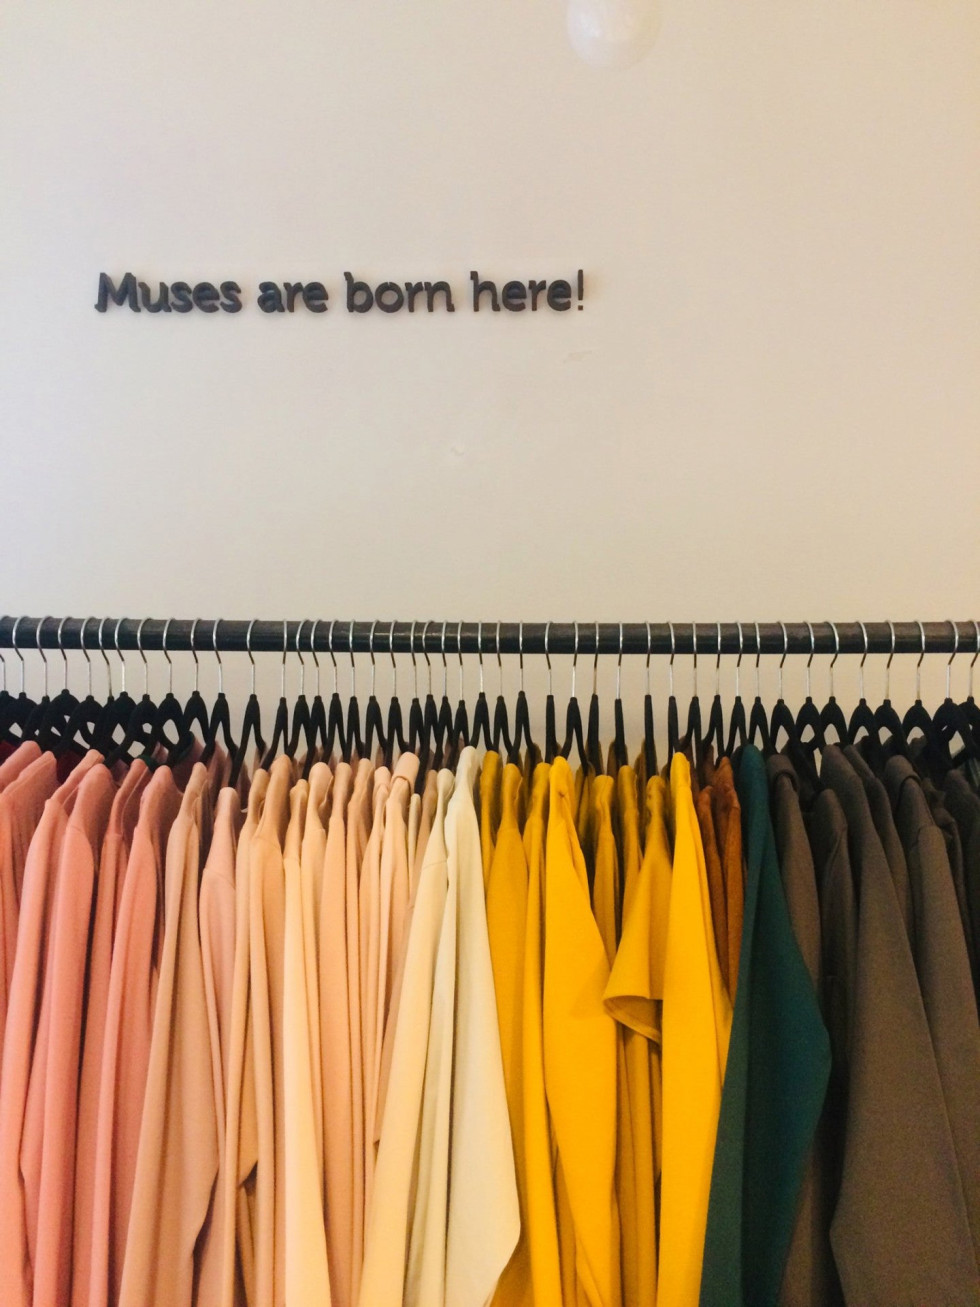 LeMuse - Muses are born here